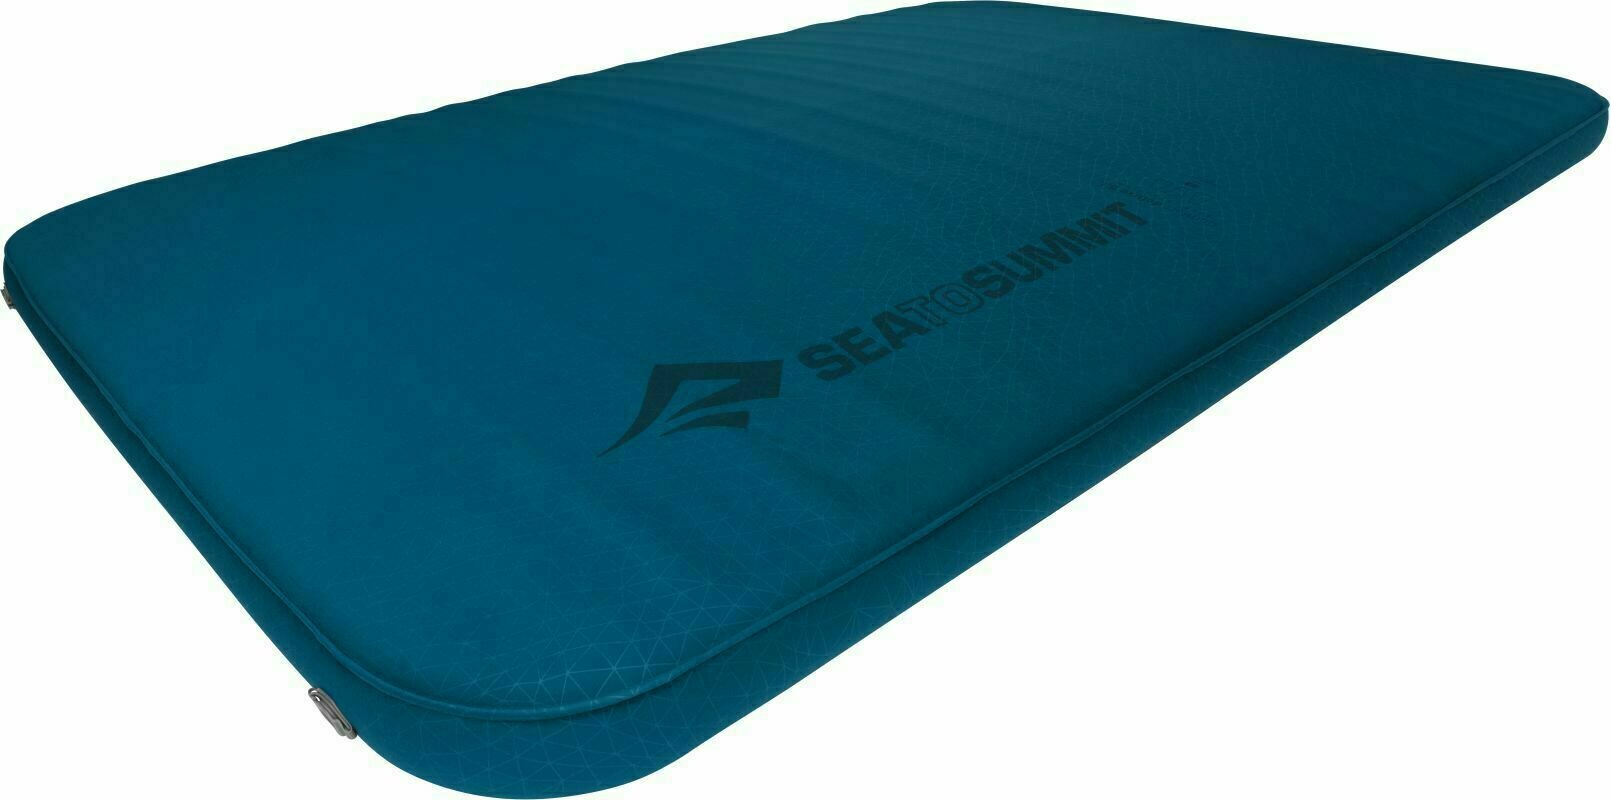 Metalas Sea To Summit Comfort Deluxe Double Byron Blue Self-Inflating Mat